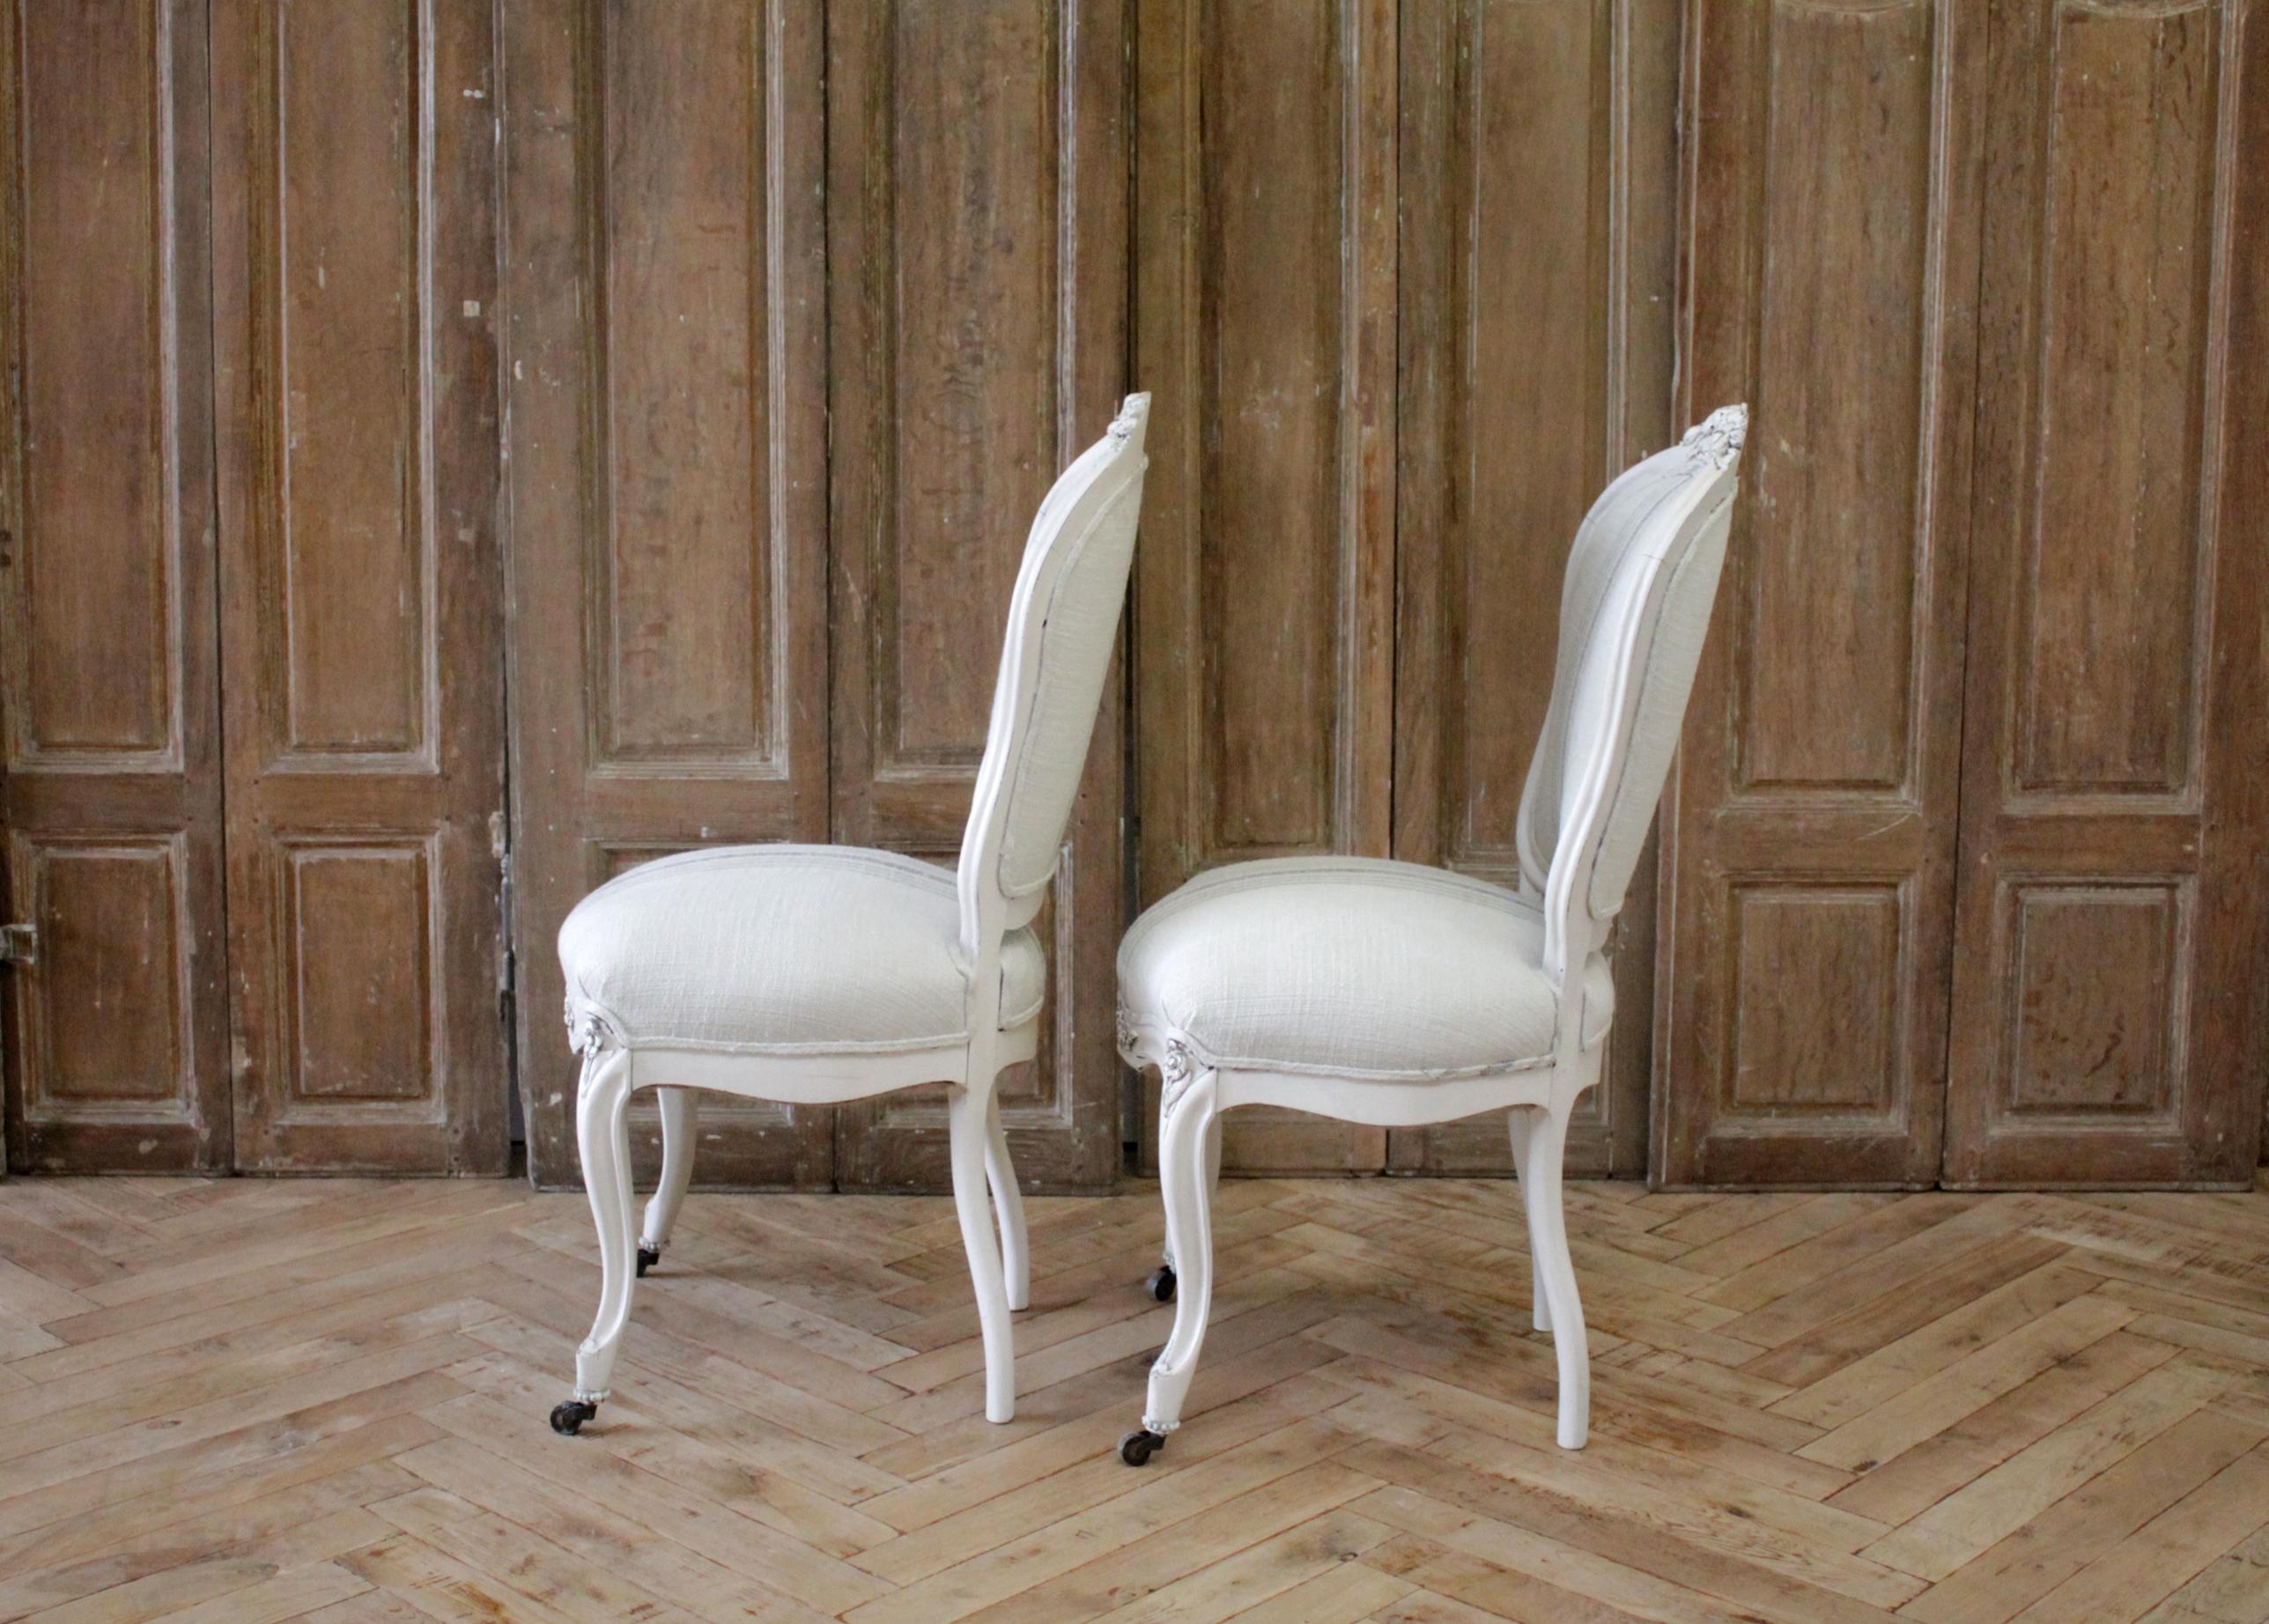 Pair of Louis XV style painted and upholstered side chairs
Painted in a soft oyster white finish with subtle distressed edges and antique patina. We reupholstered these in a thick nubby soft linen blend, with gray and olive stripes.
Chairs are